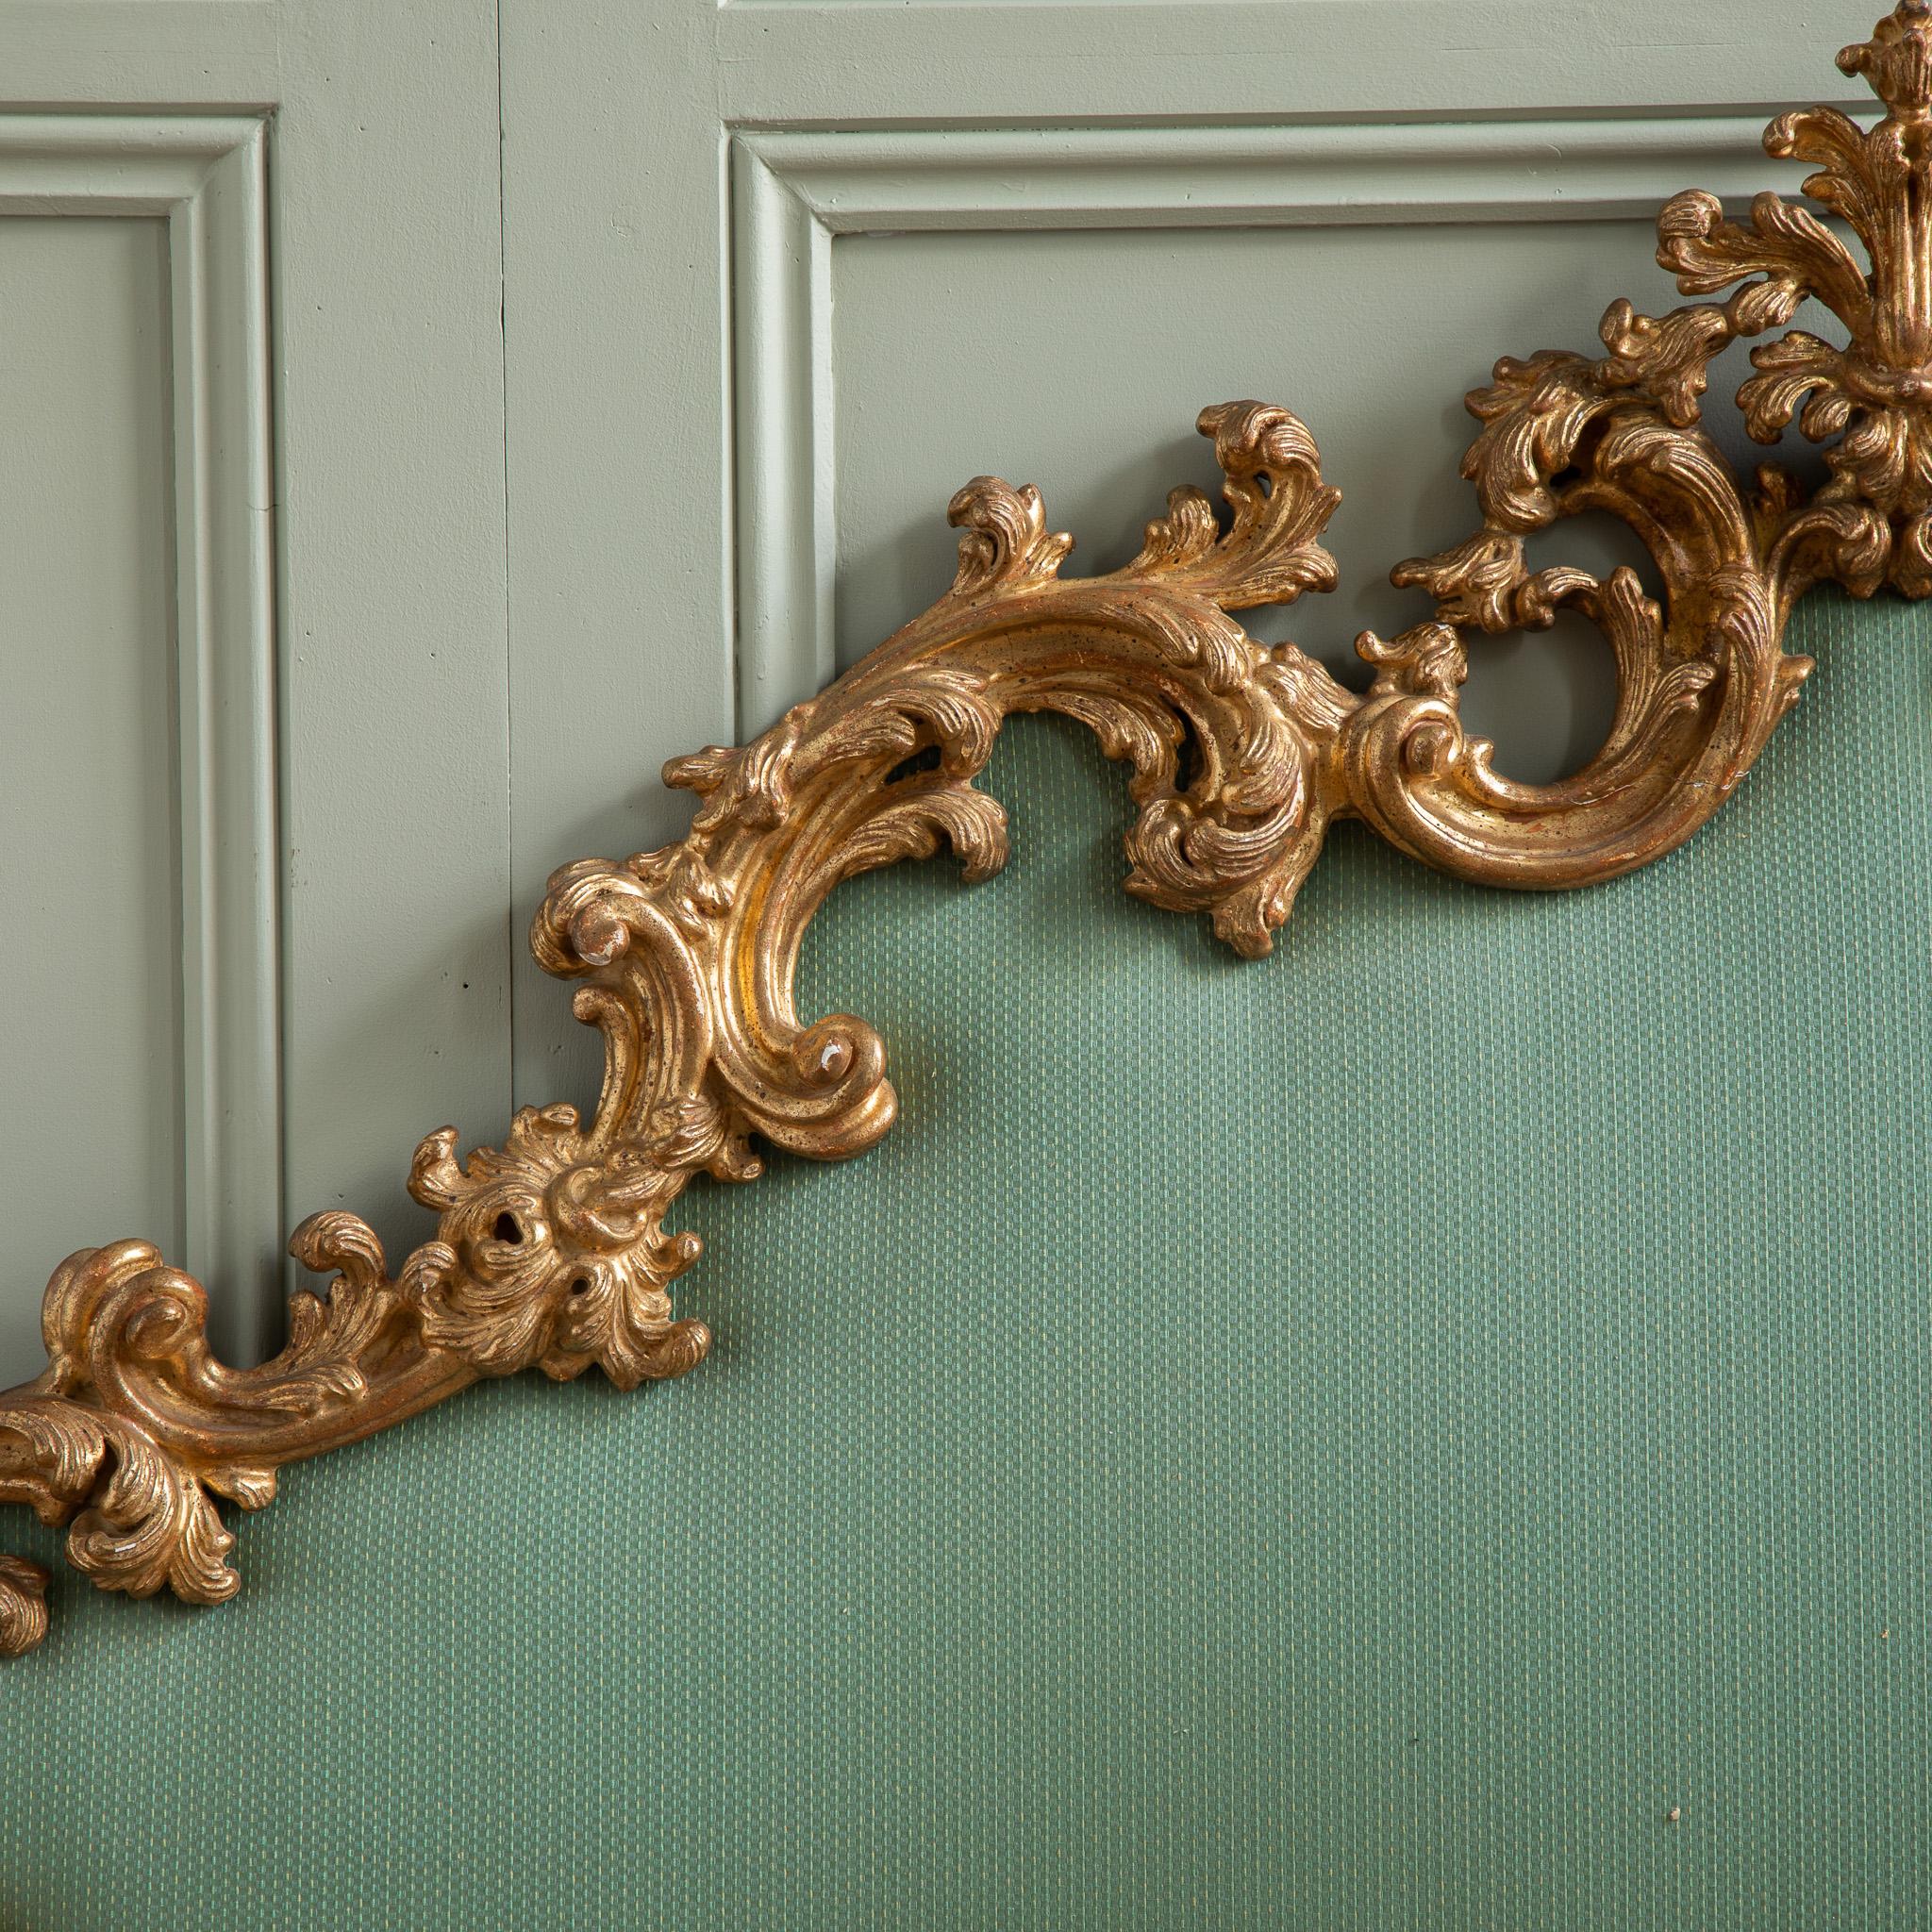 Large 19th Century Italian Giltwood Headboard in Rococo Style For Sale 1